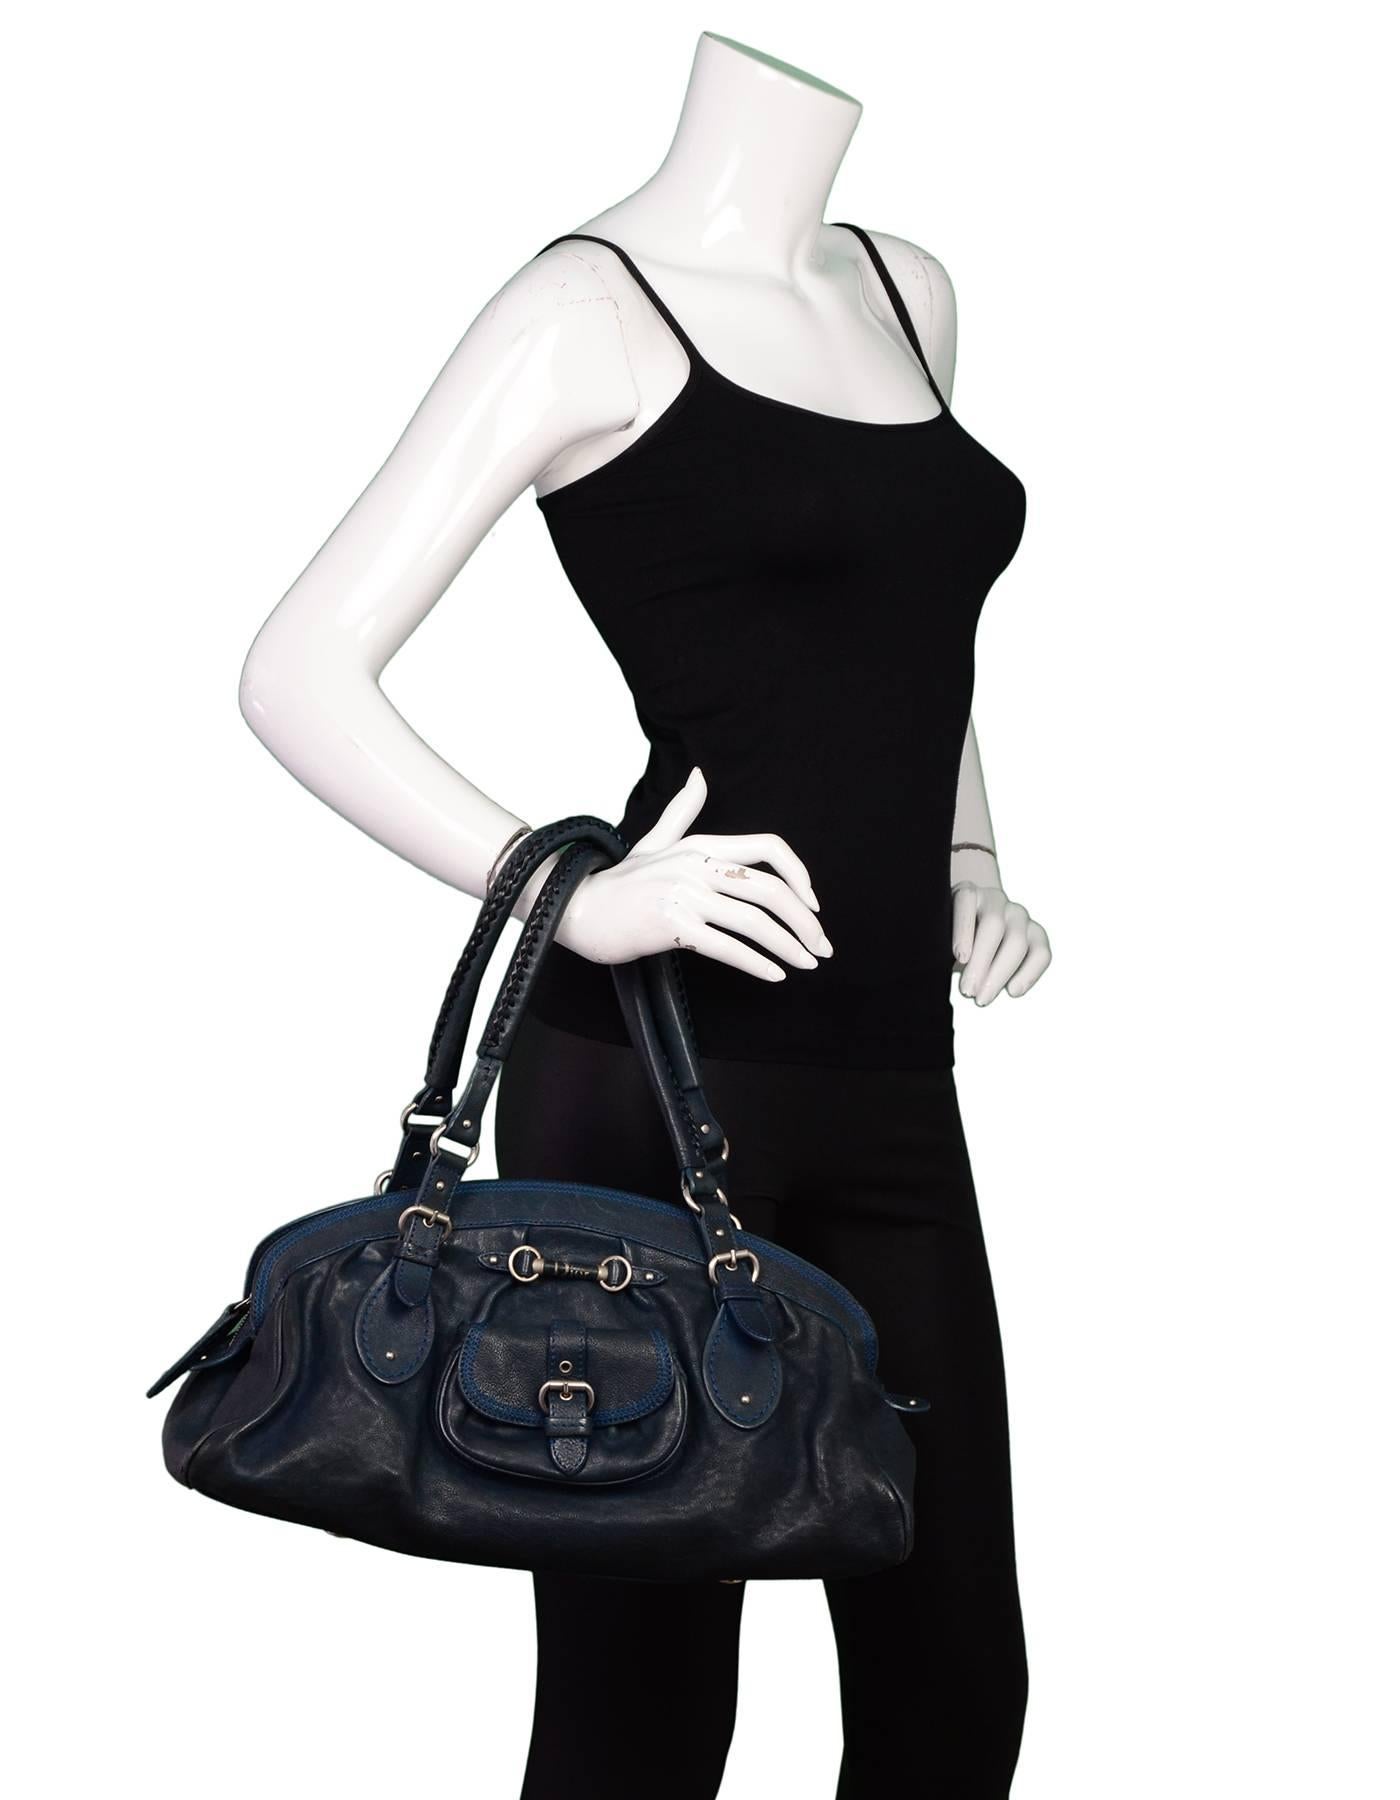 100% Authentic Christian Dior Blue Bowler Bag. Features snap closure pocket with buckle detail and horsebit with Dior logo on front. Pleating on front and back. Shoulder straps with cross stitch detail, silver hardware, zip top. Black leather lining